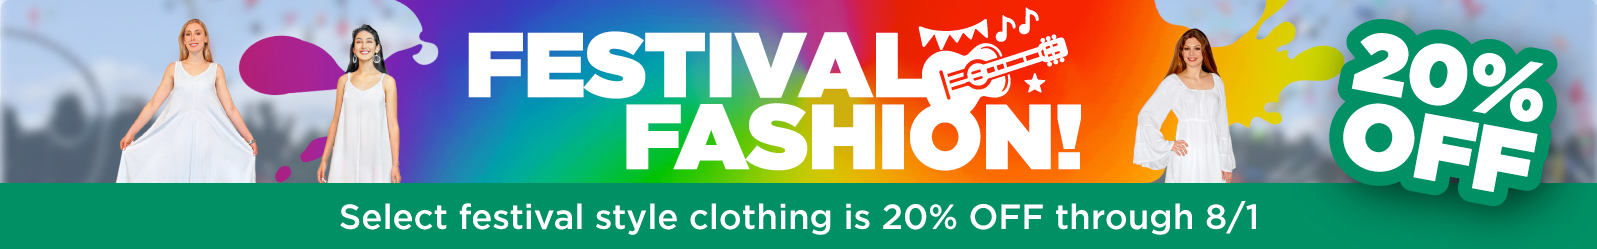 Festival Fashion! Select festival style clothing is 10% OFF through 8/1